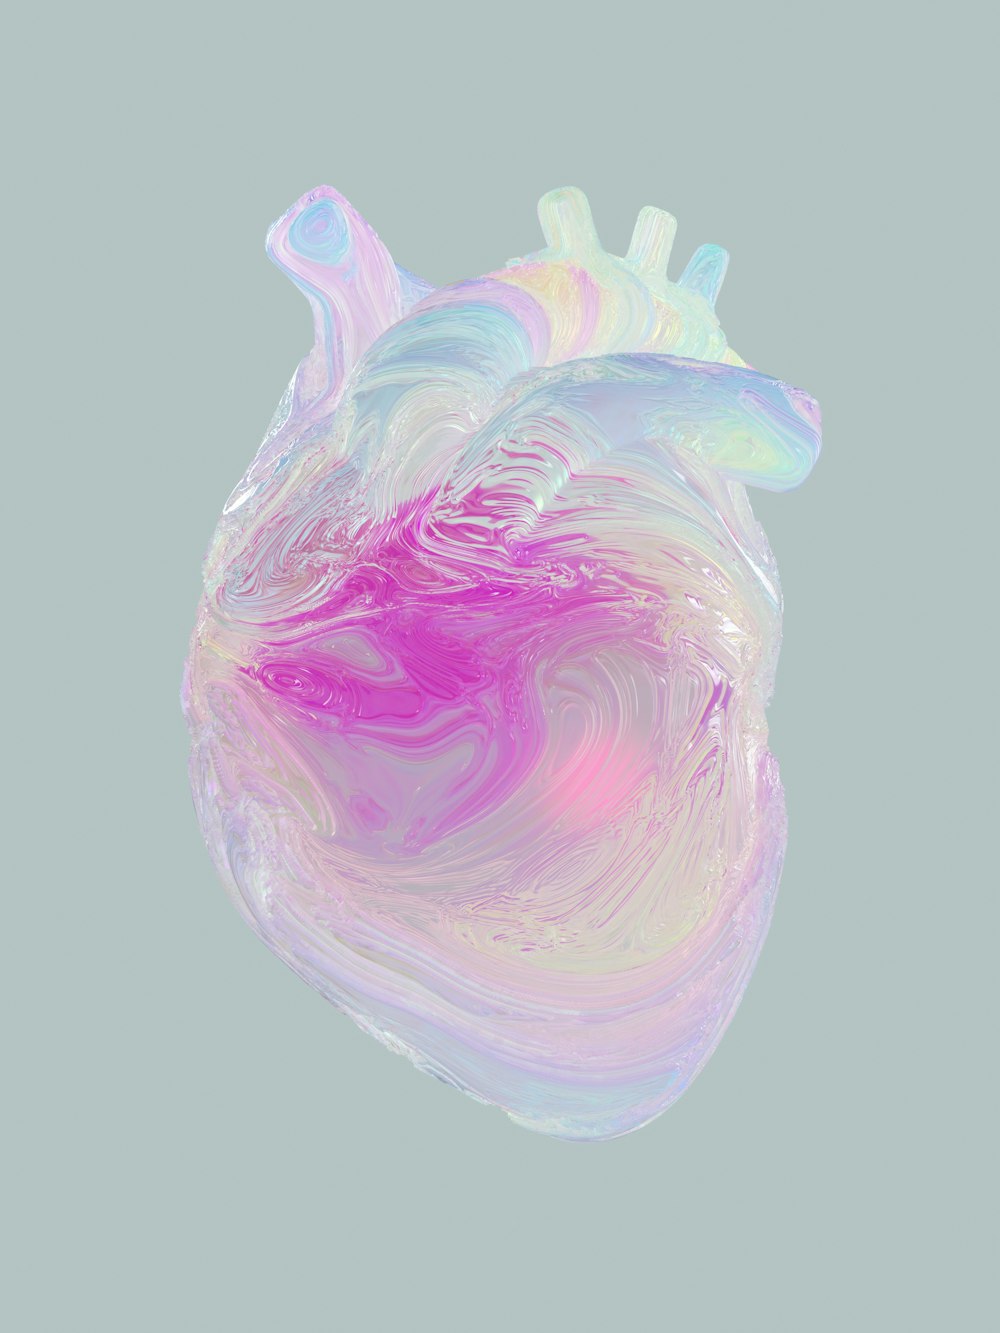 a heart shaped object with a pink and blue swirl